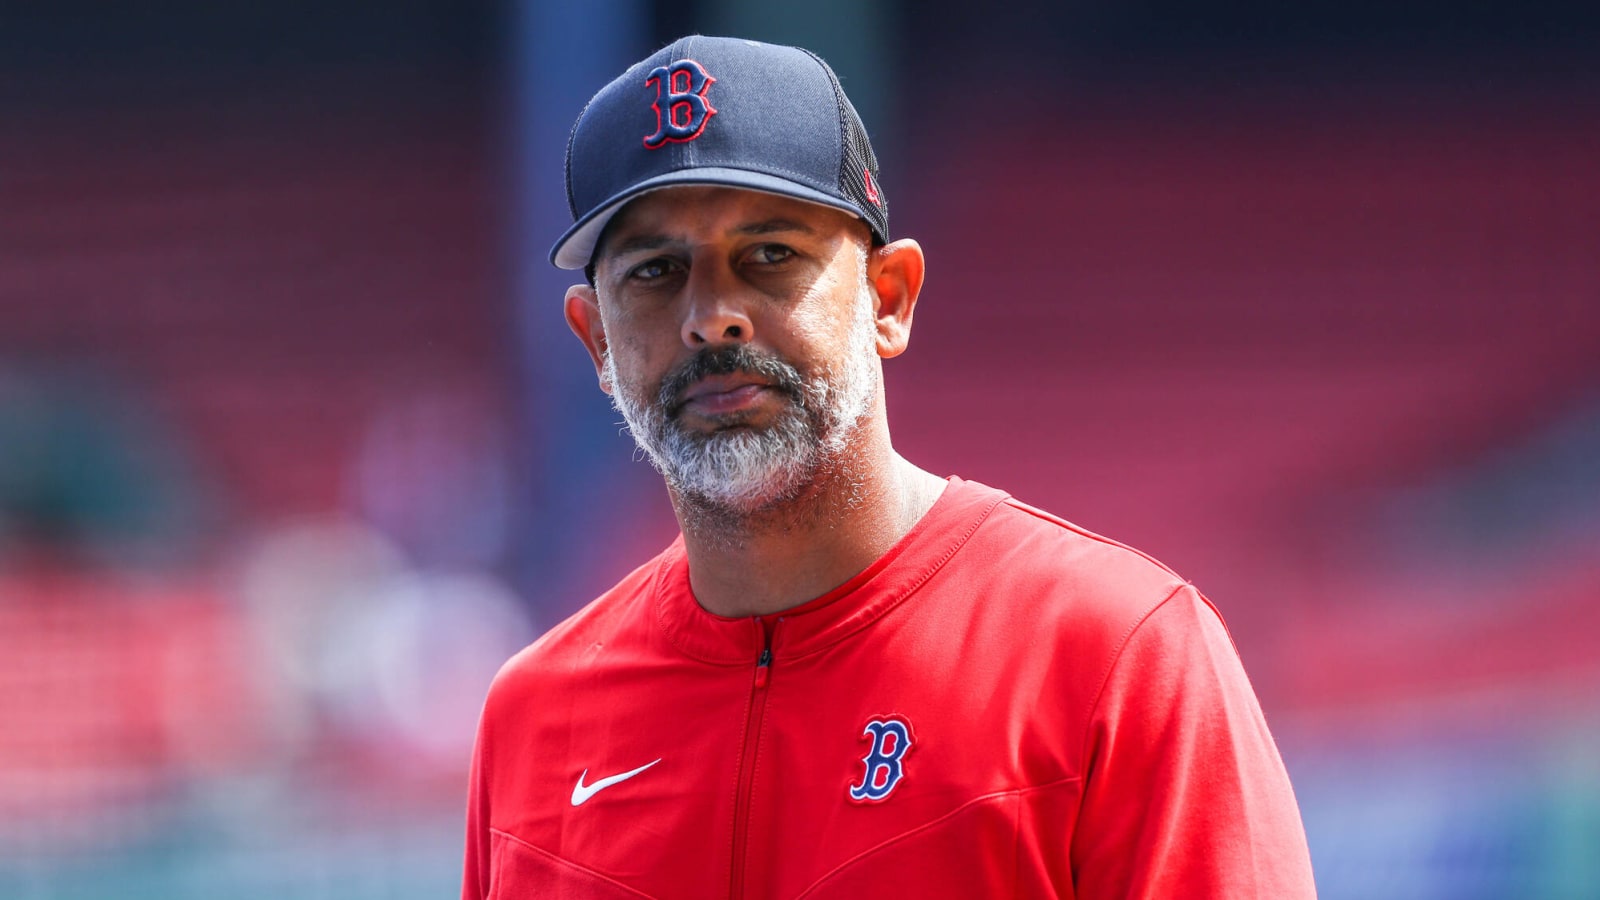 It's been a challenge': Red Sox season has been a grind for Alex Cora